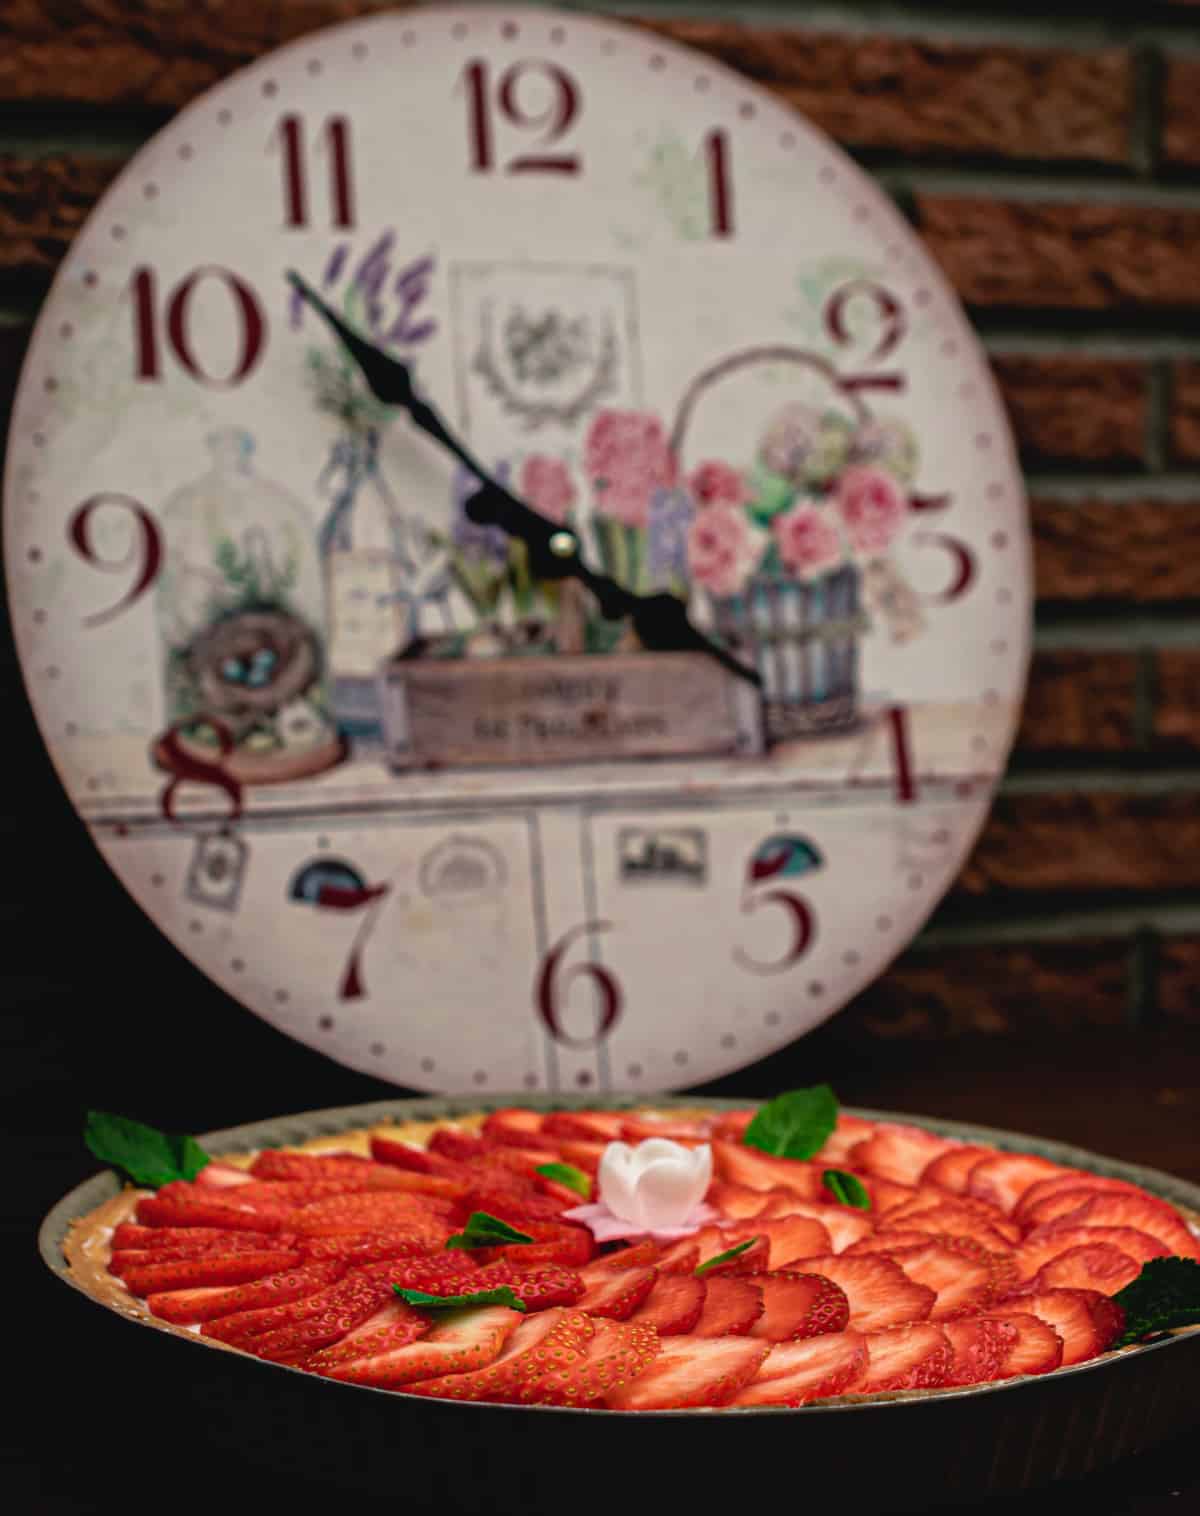 Old-fashioned decorative wall clock in background near plate of sliced strawberries.